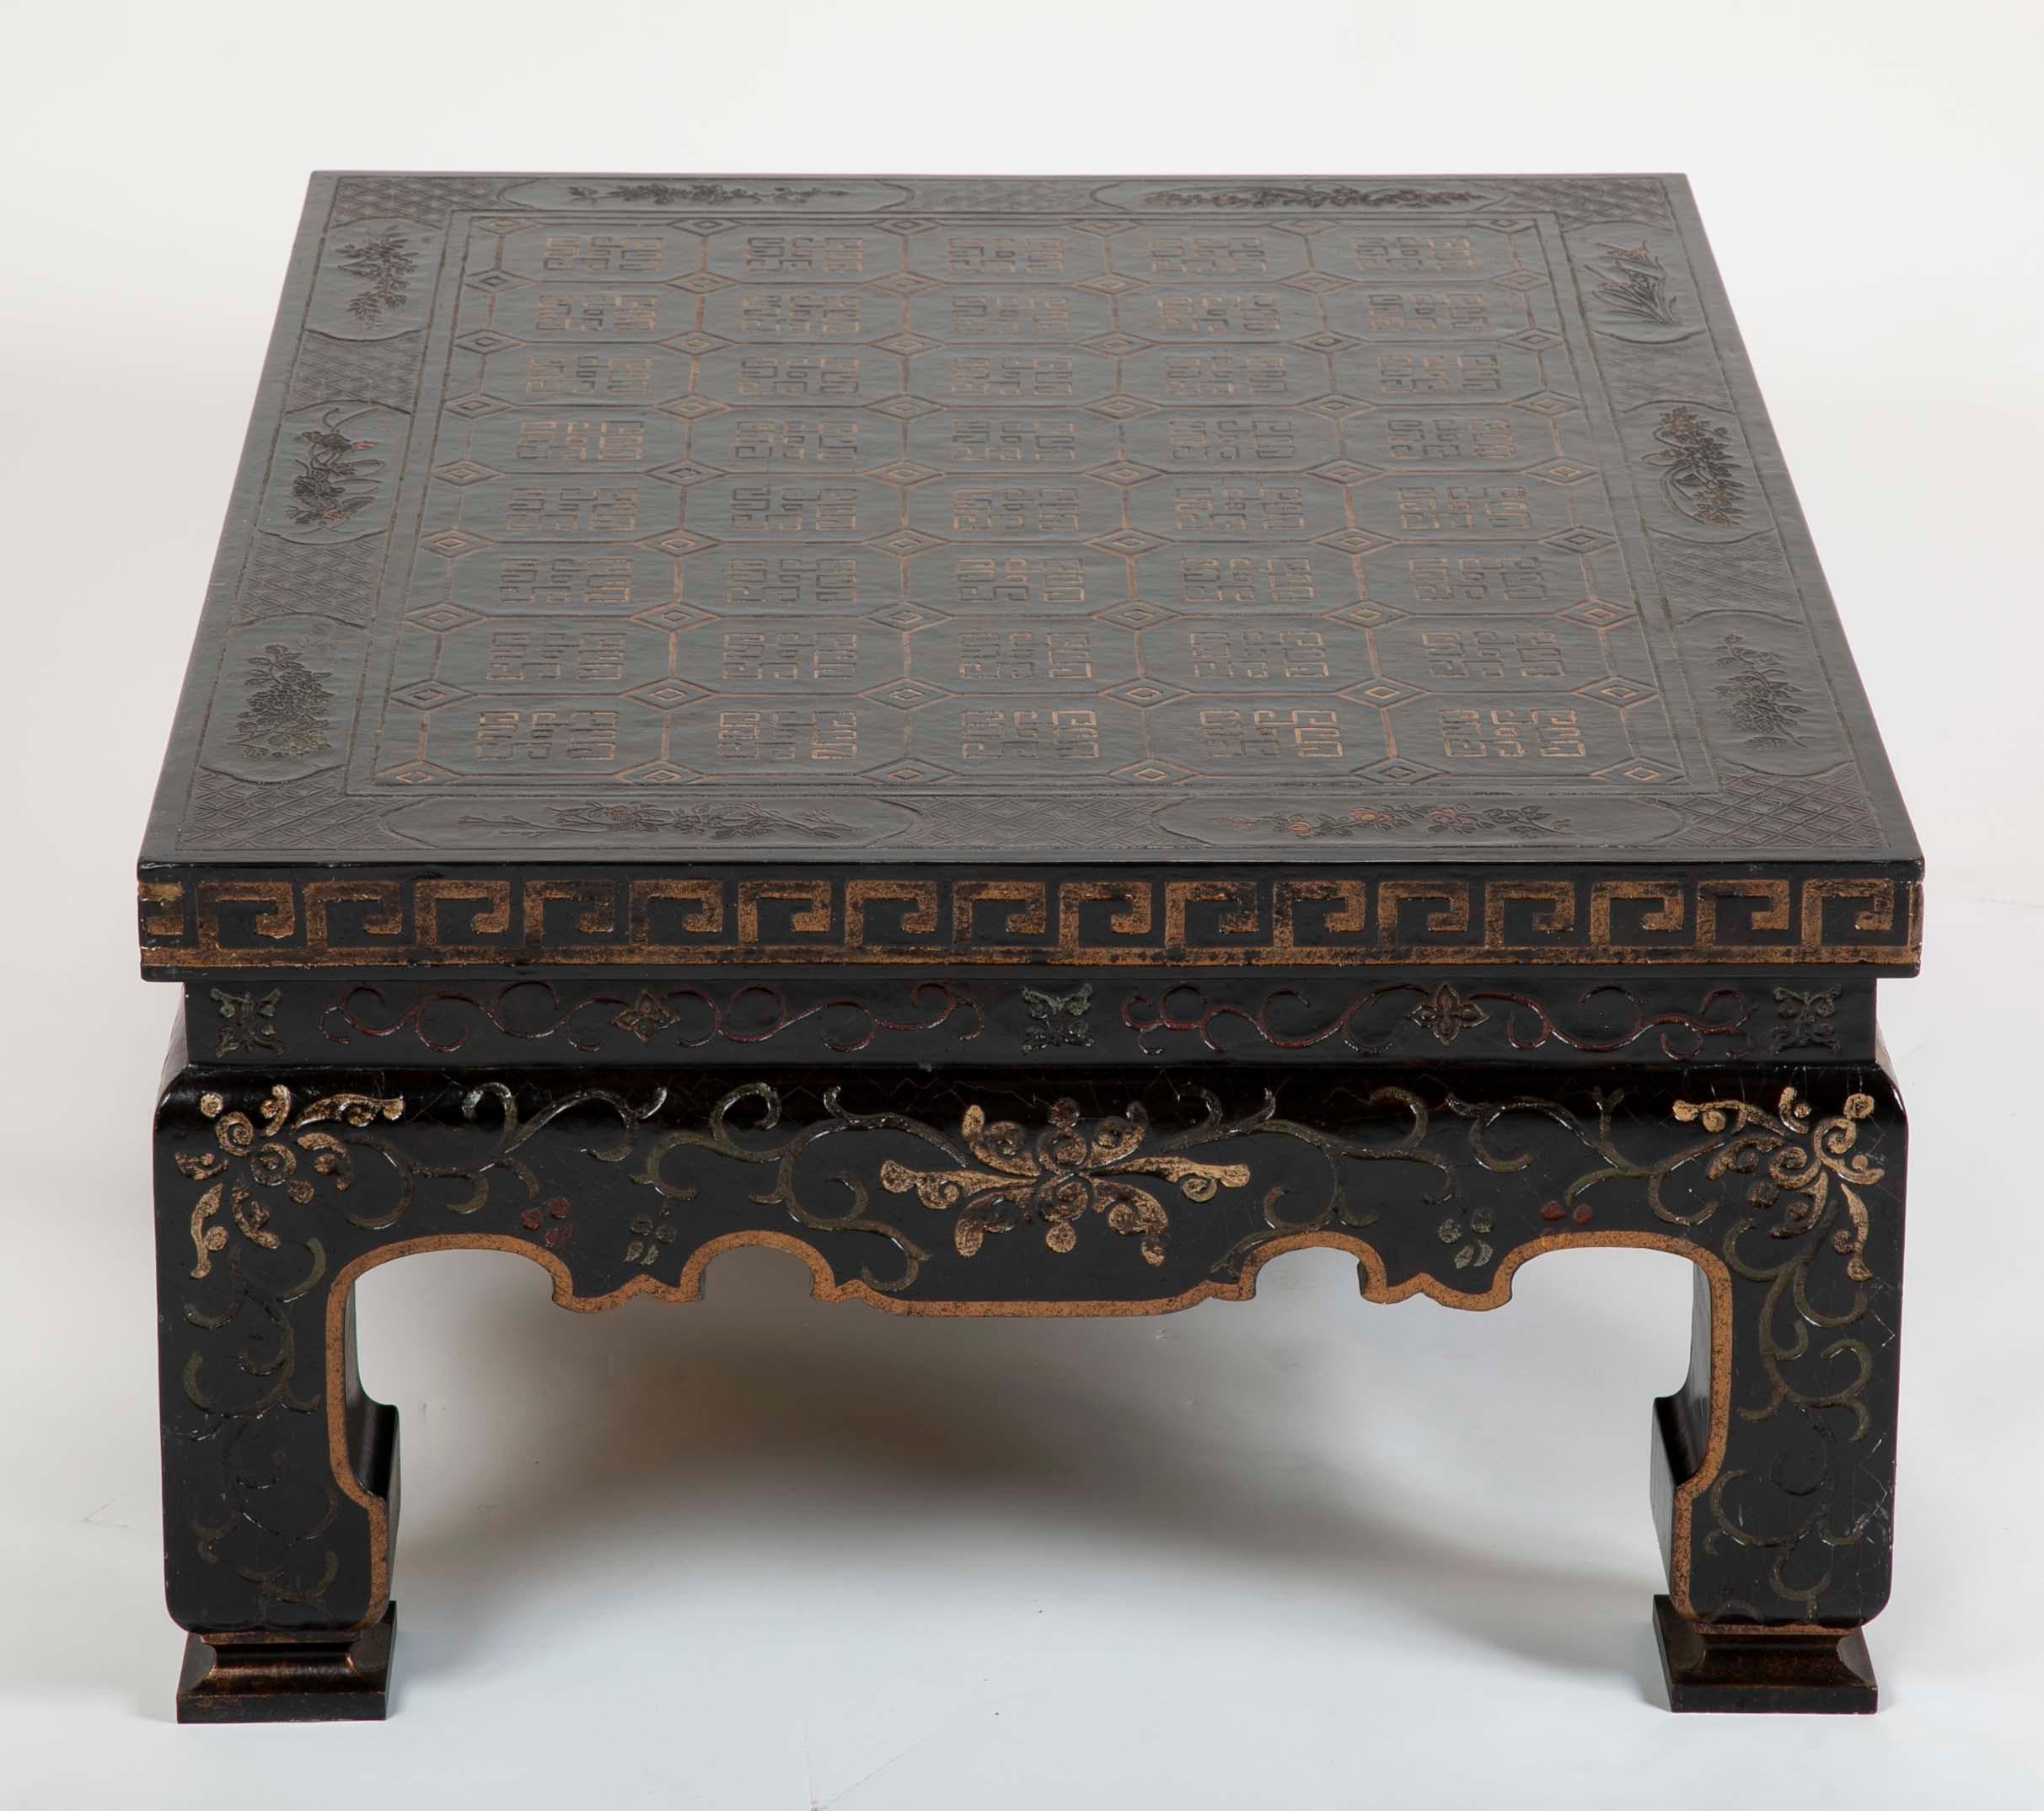 Midcentury Black Lacquer and Gilt Coffee Table with Chinoiserie Decoration 6